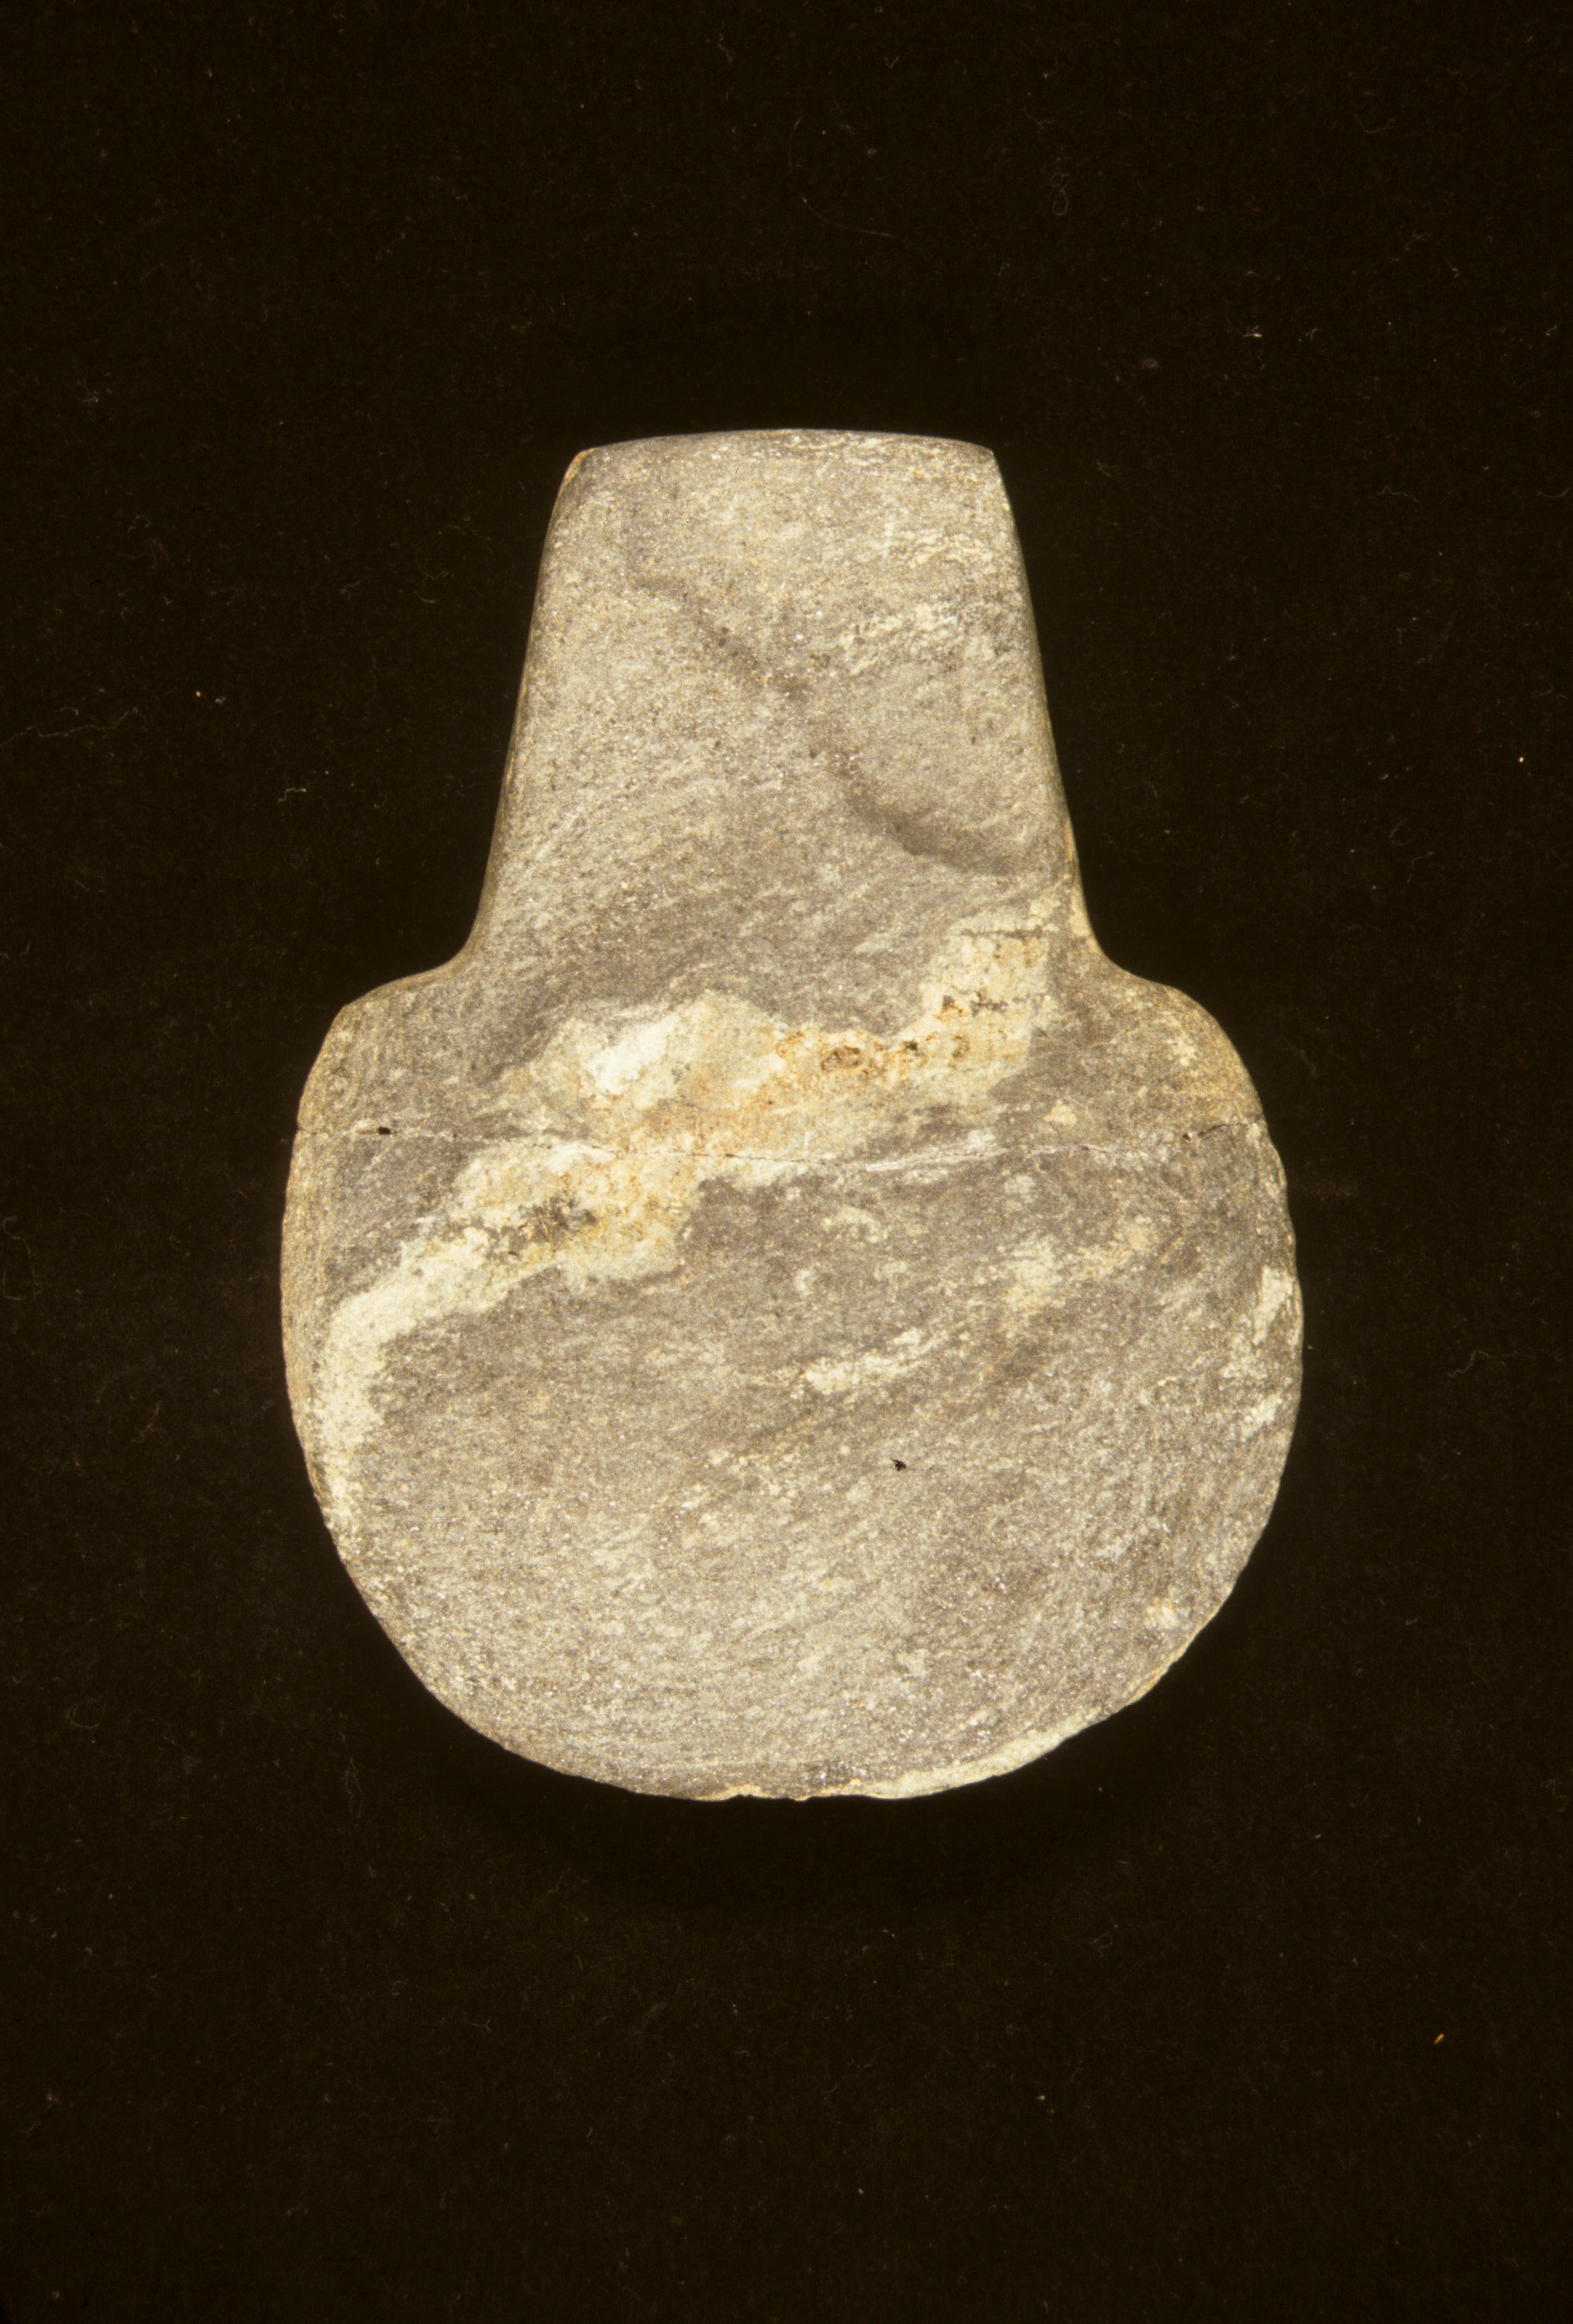 Stone spatulate axe or spud from the Hardins site in Gaston Co., NC ...